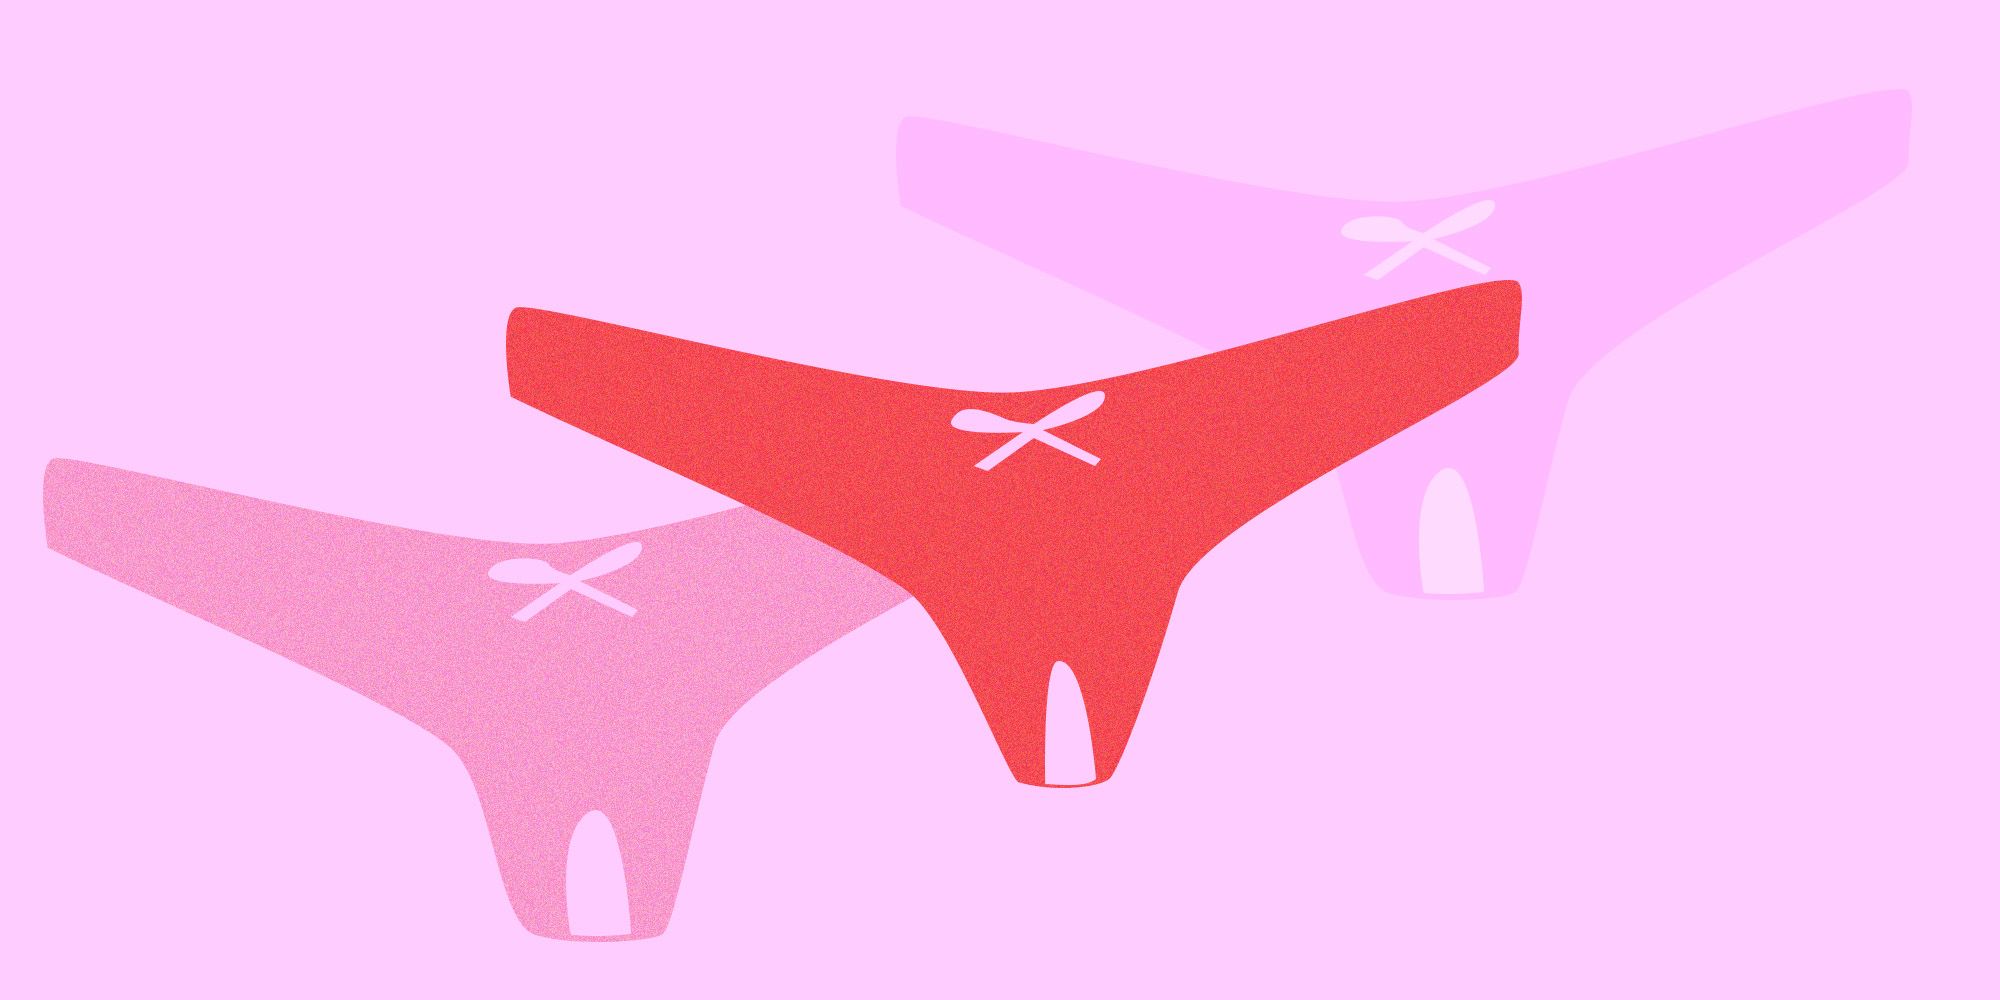 2000px x 1000px - Crotchless panties - Crotchless knickers and underwear